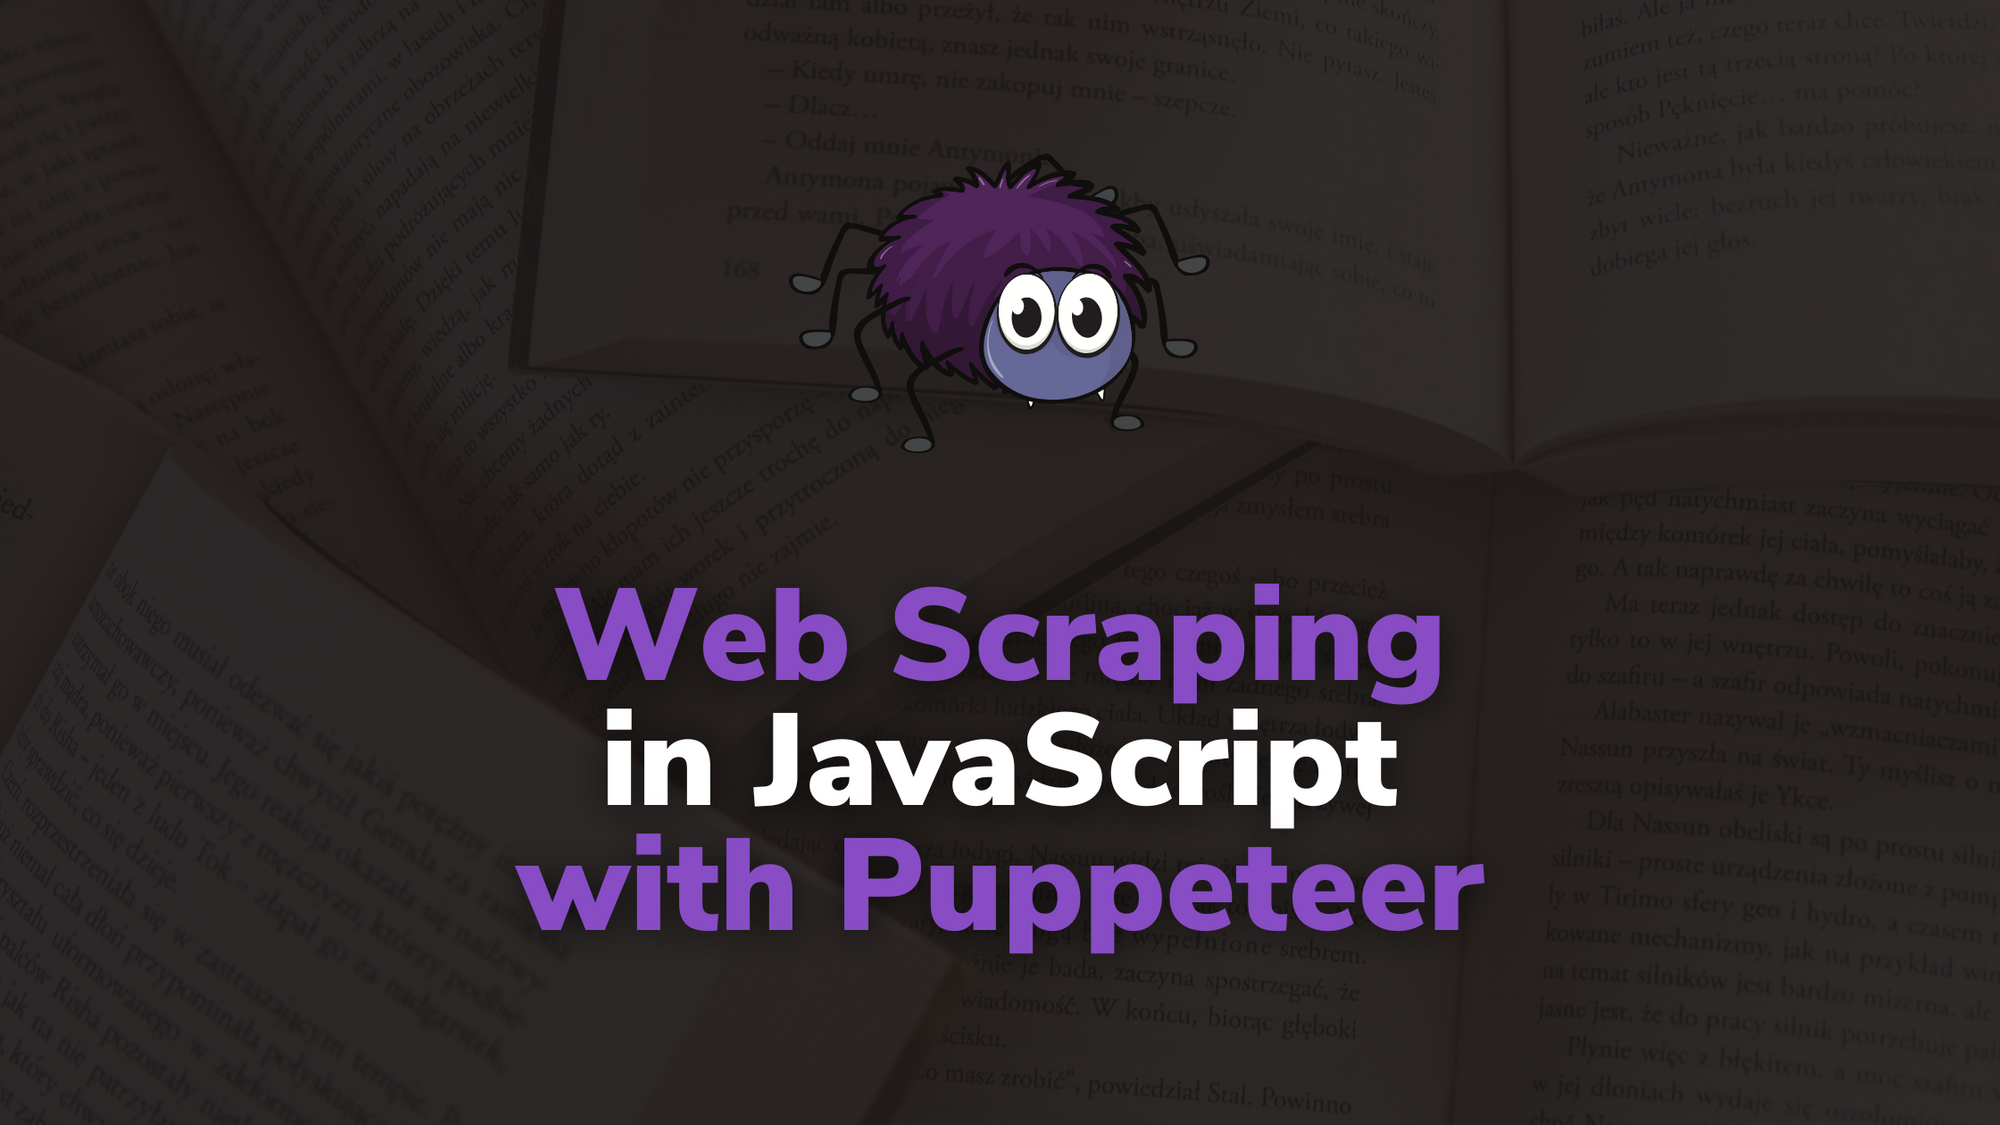 Web Scraping in JavaScript – How to Use Puppeteer to Scrape Web Pages